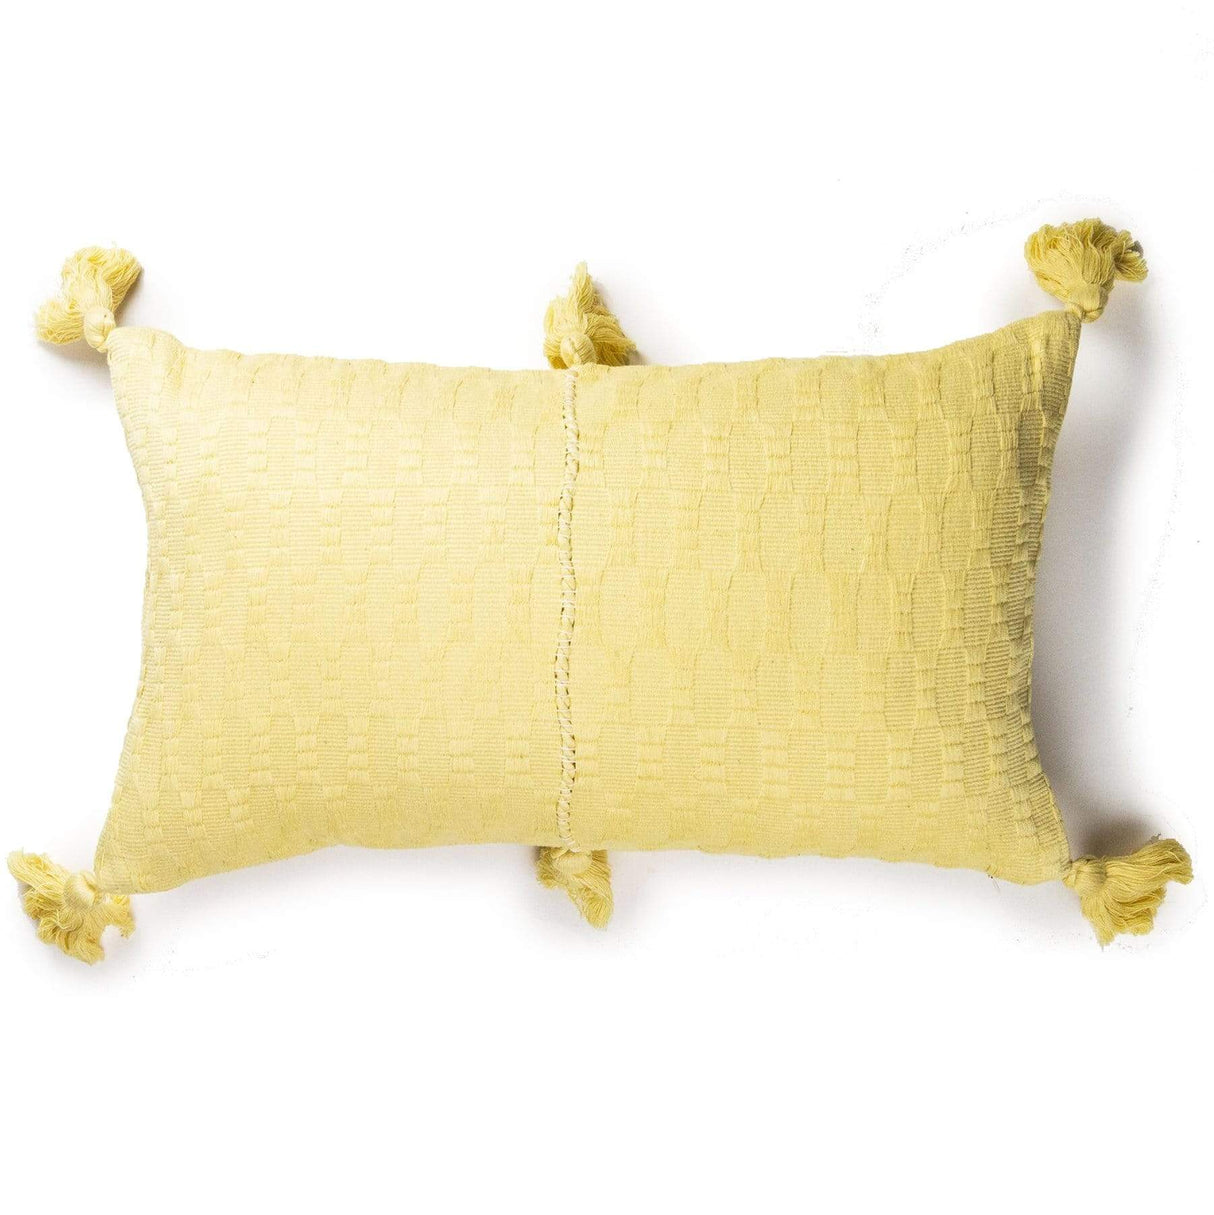 Archive New York Antigua Pillow - Butter Solid Pillow & Decor archive-R1220011-butter-solid